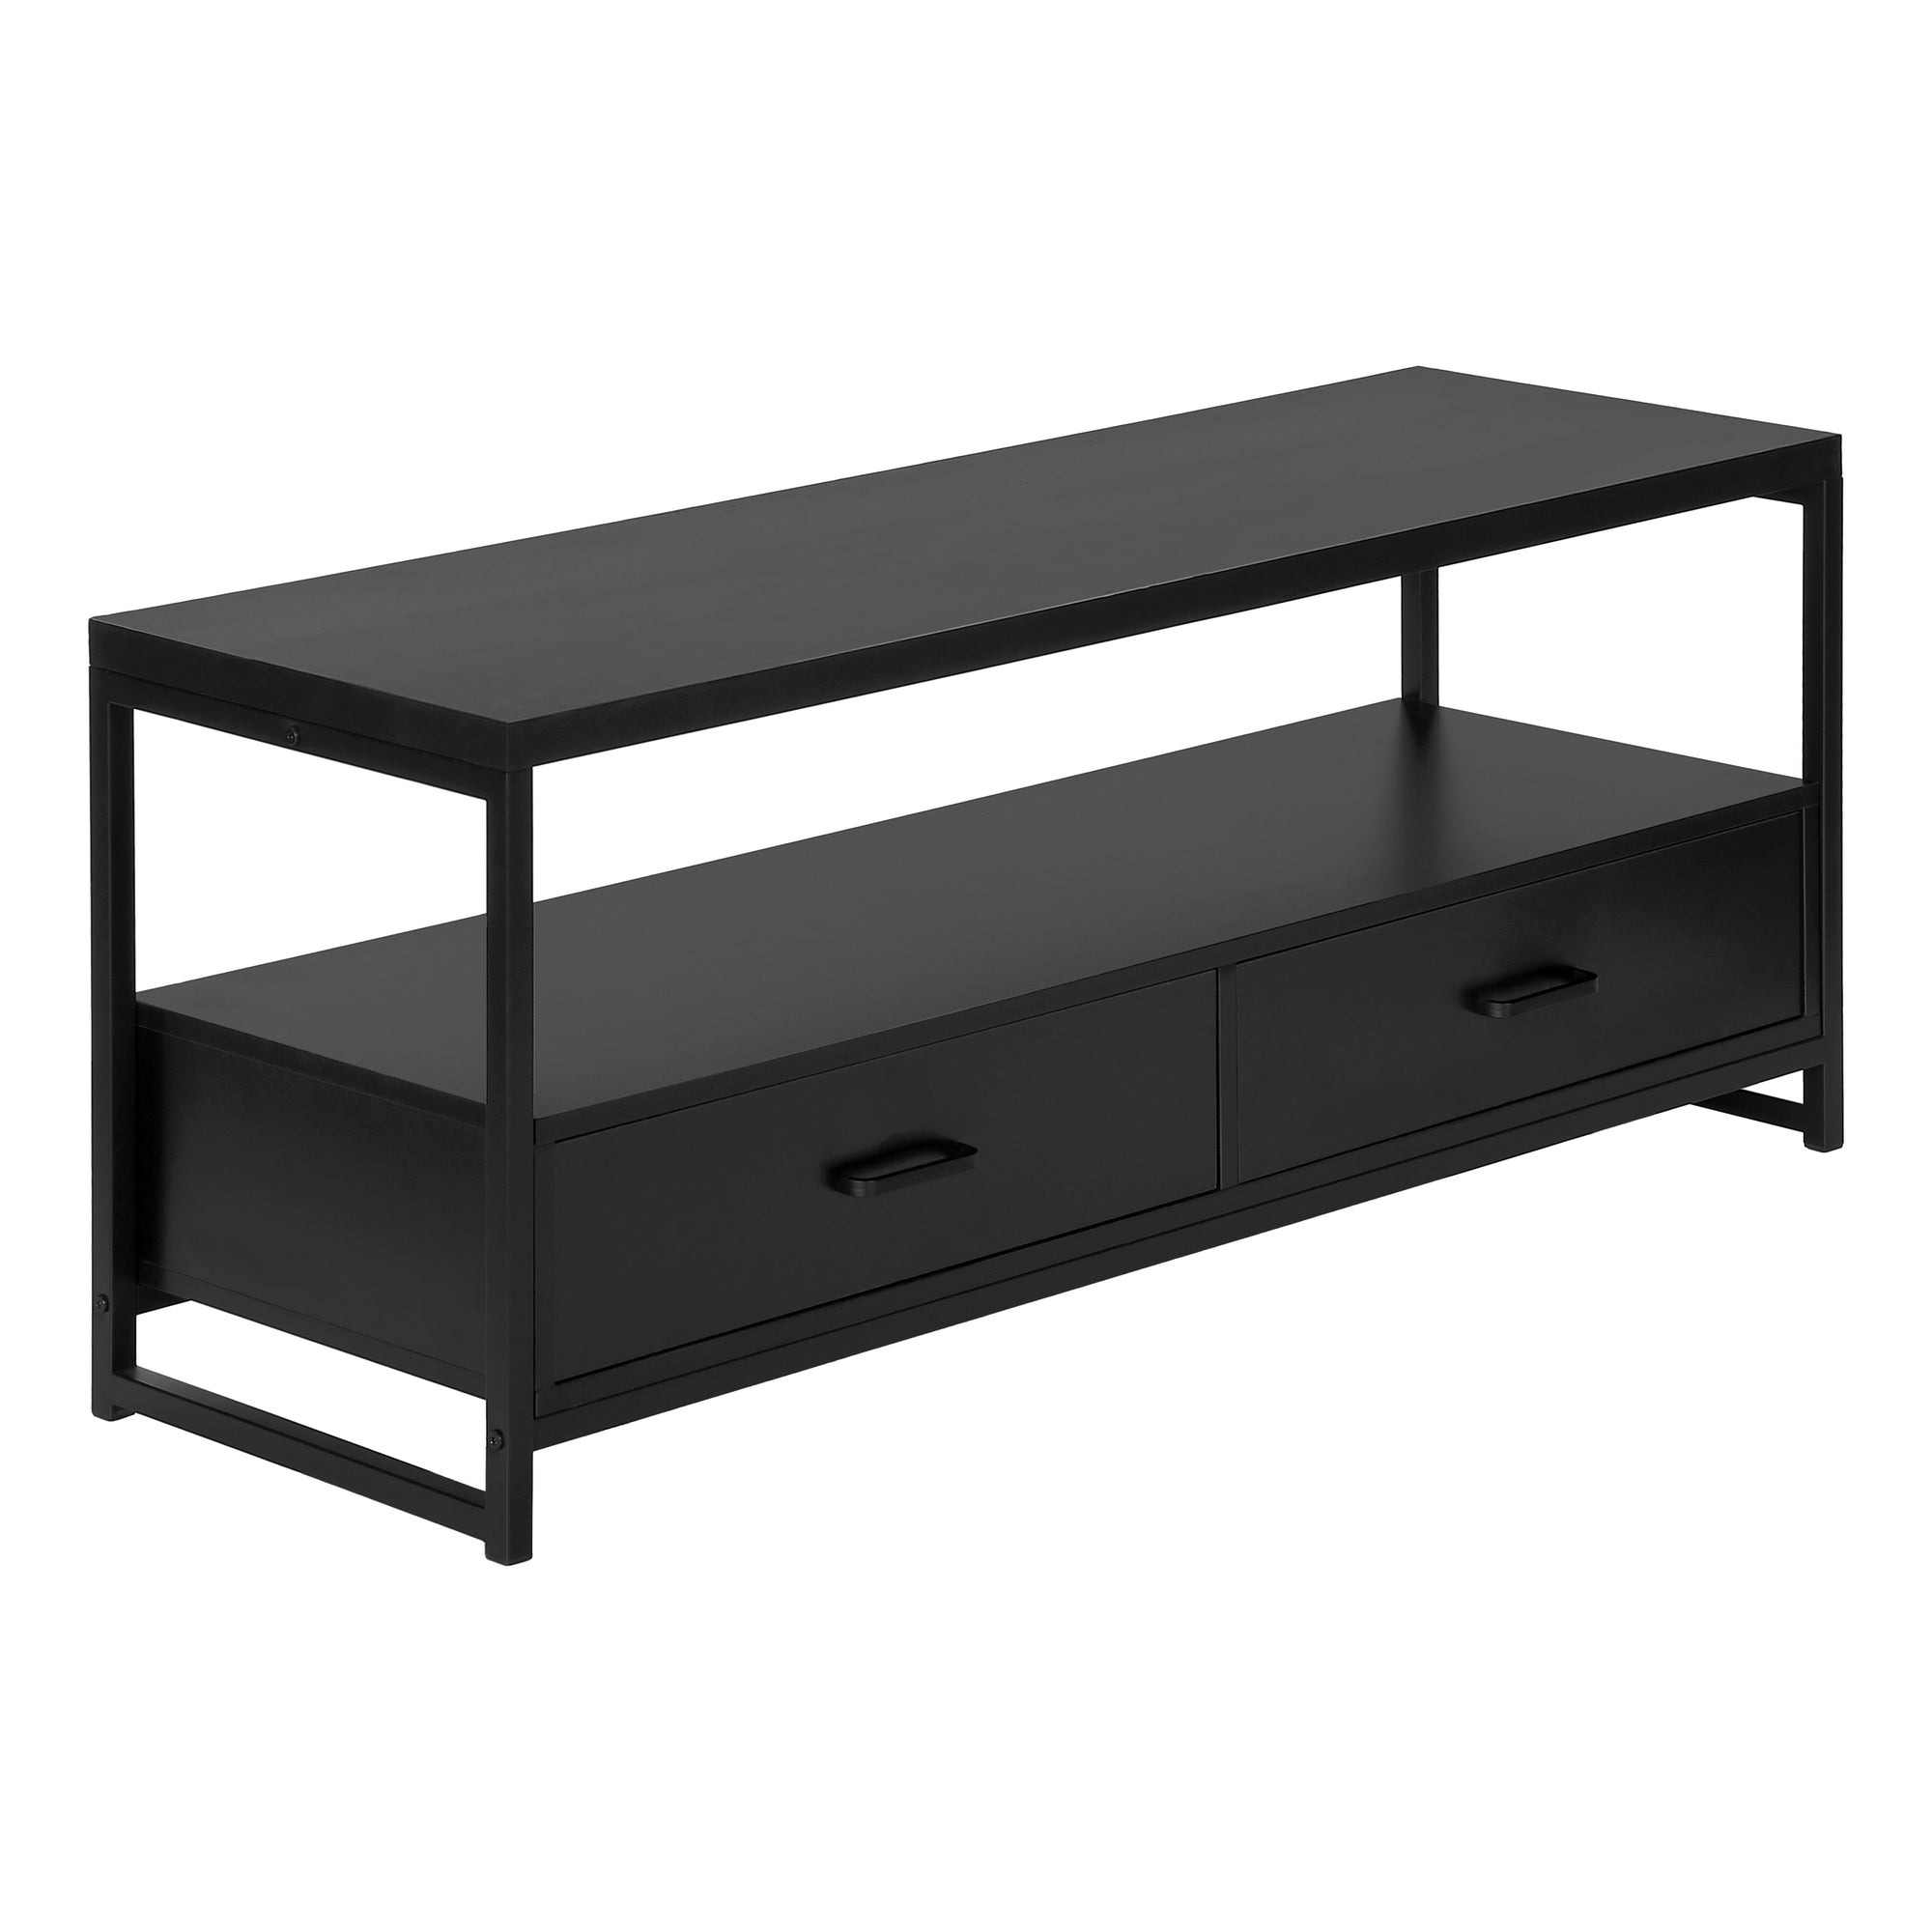 MN-672870    Tv Stand, 48 Inch, Console, Media Entertainment Center, Storage Cabinet, Living Room, Bedroom, Laminate, Metal, Black, Contemporary, Modern